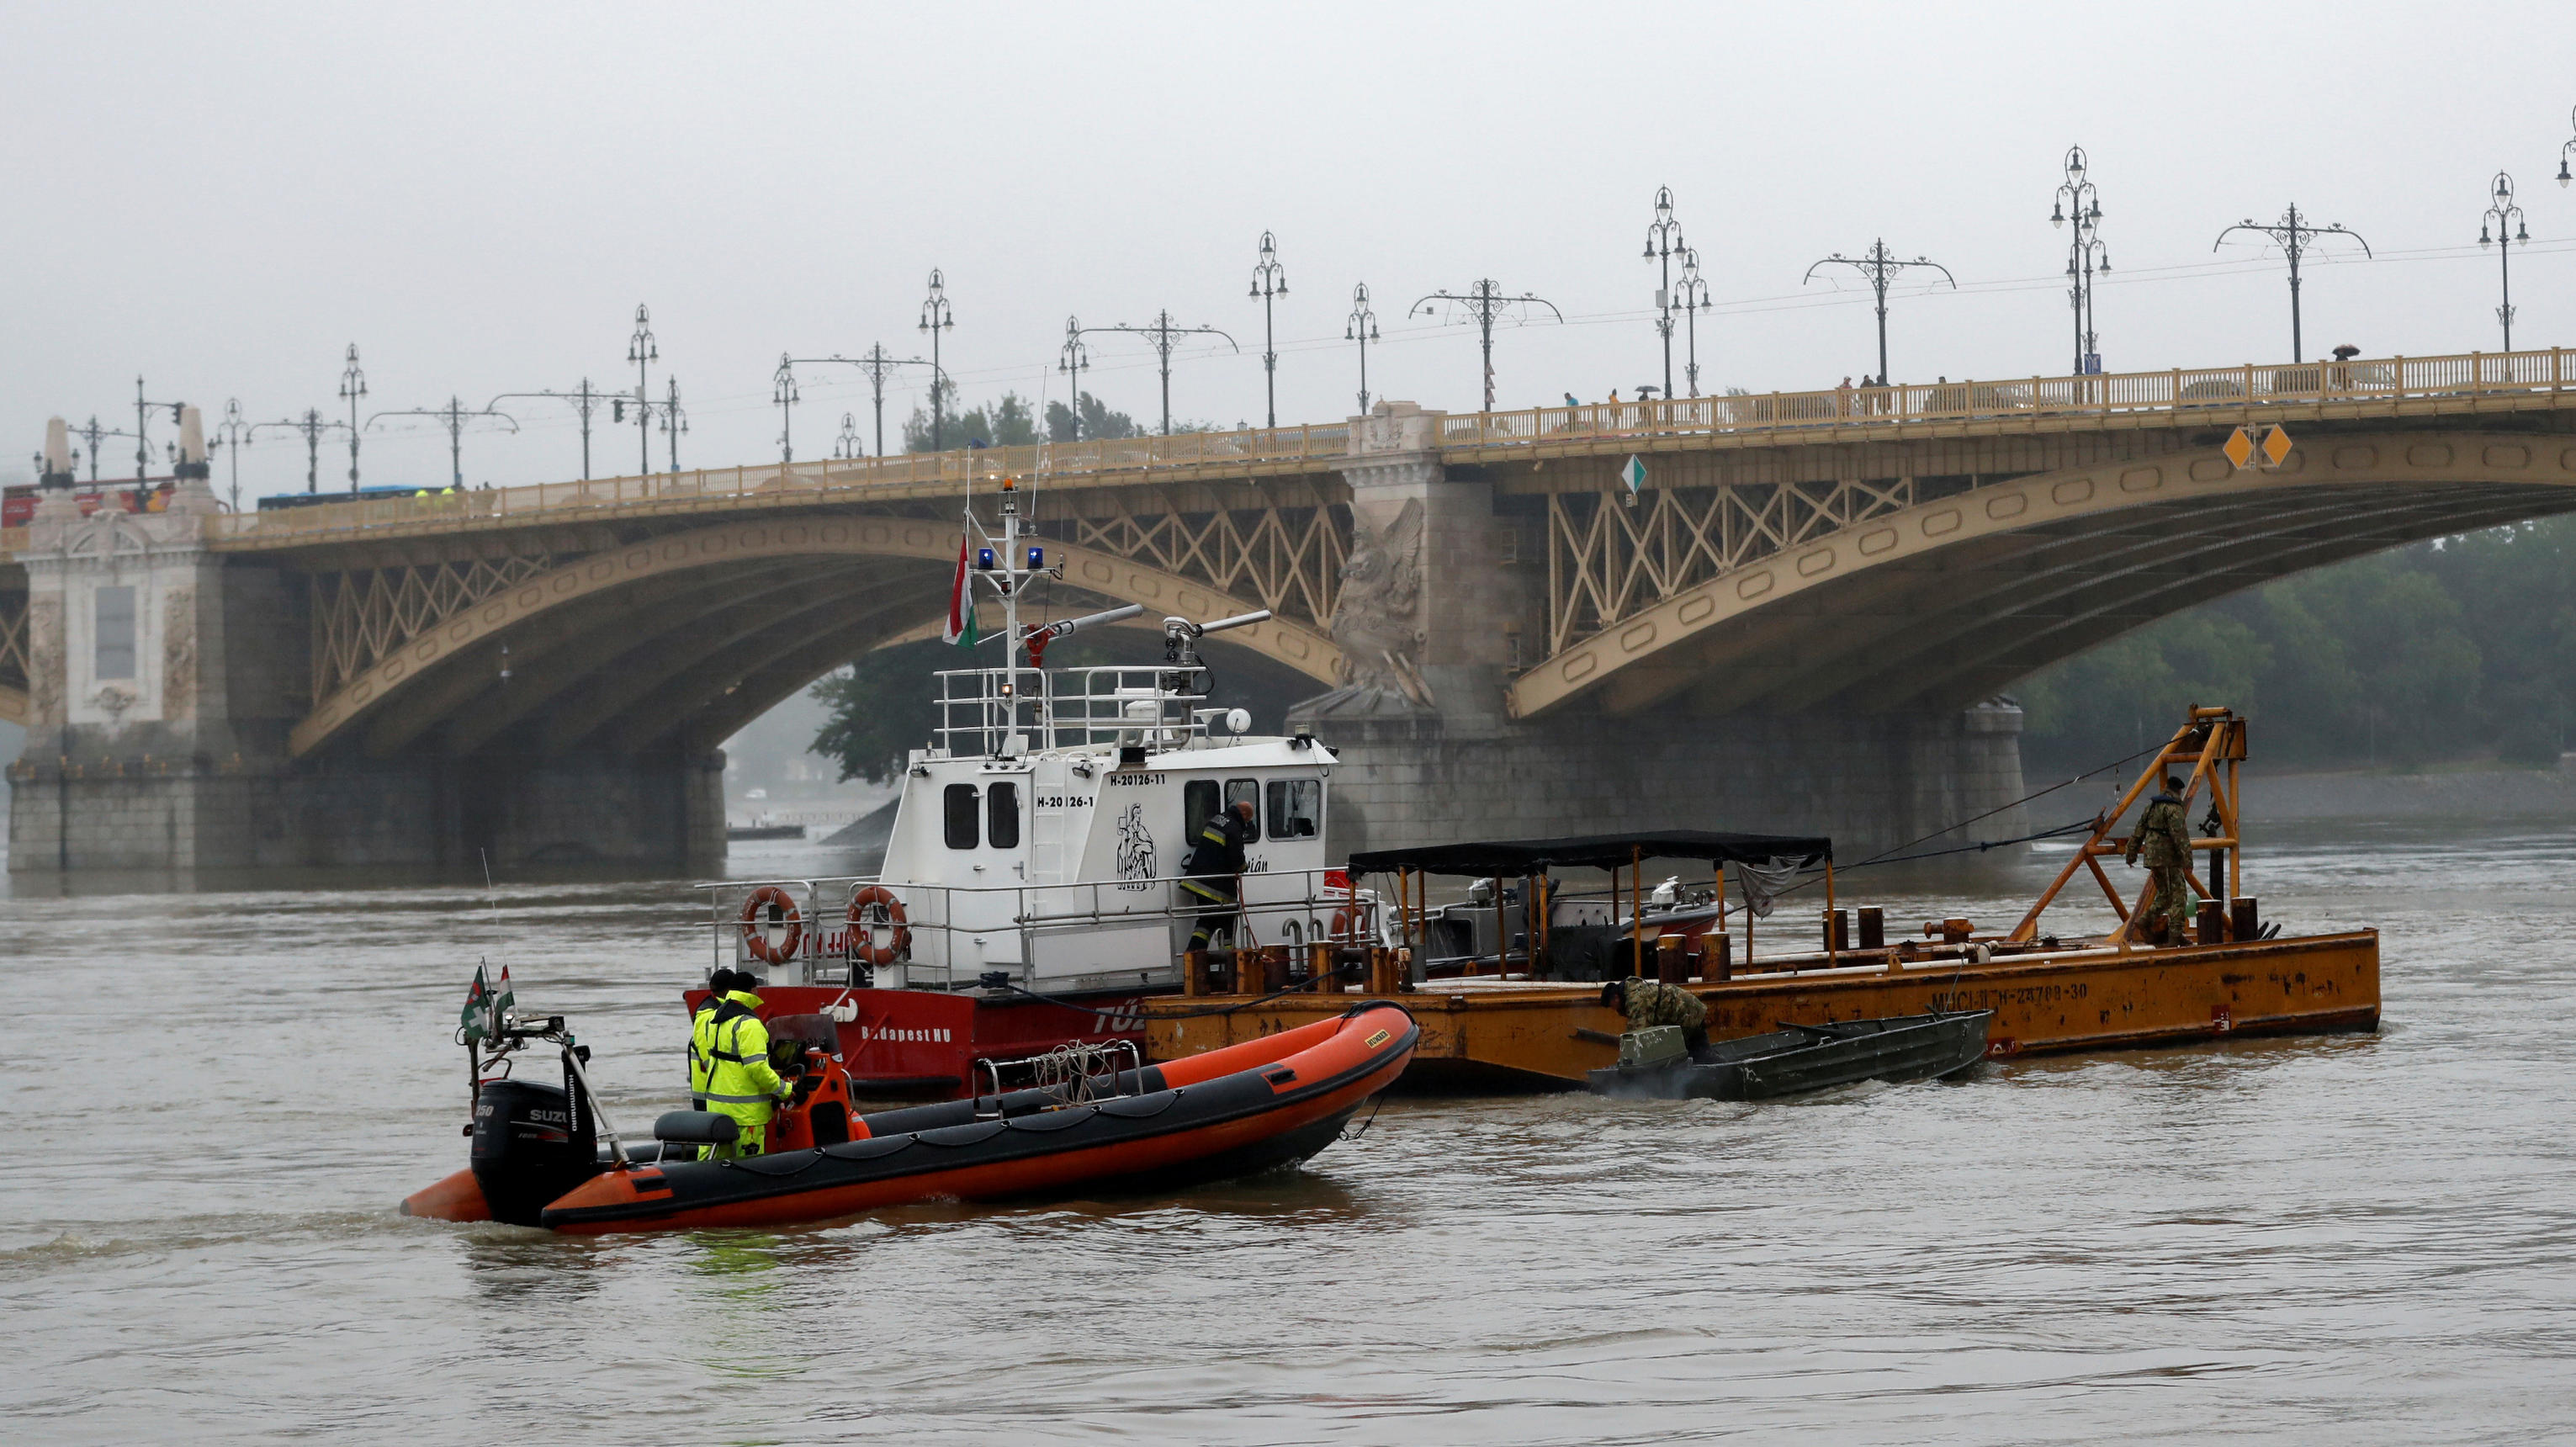 A rescue boat is seen after a ship accident that killed several people on the Danube river in Budapest, Hungary, May 30, 2019. REUTERS/Bernadett Szabo